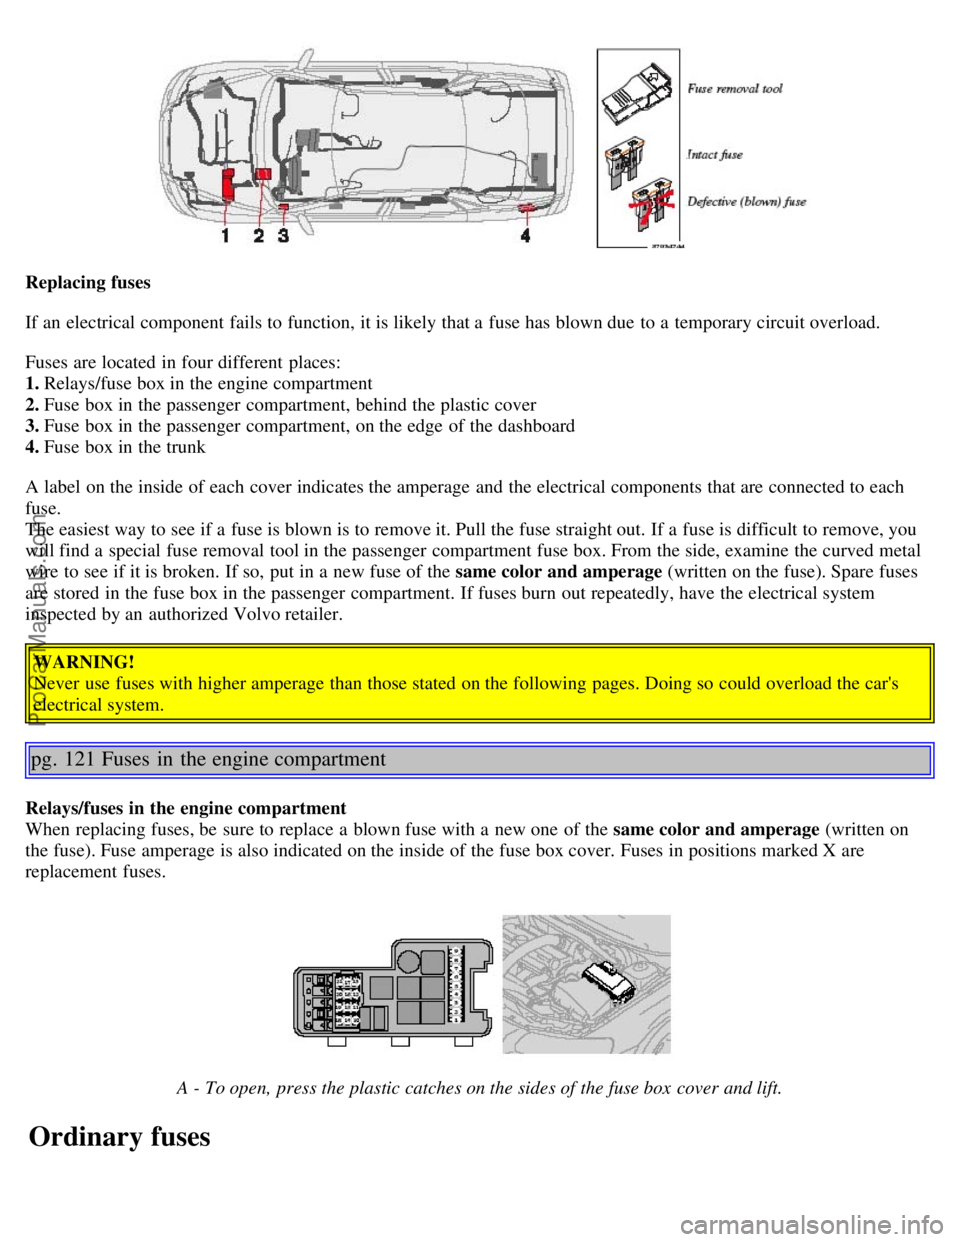 VOLVO S80 2006  Owners Manual Replacing fuses
If an  electrical component  fails to function, it is likely that a  fuse has blown due  to a  temporary circuit overload.
Fuses are located in four different  places: 
1. Relays/fuse 